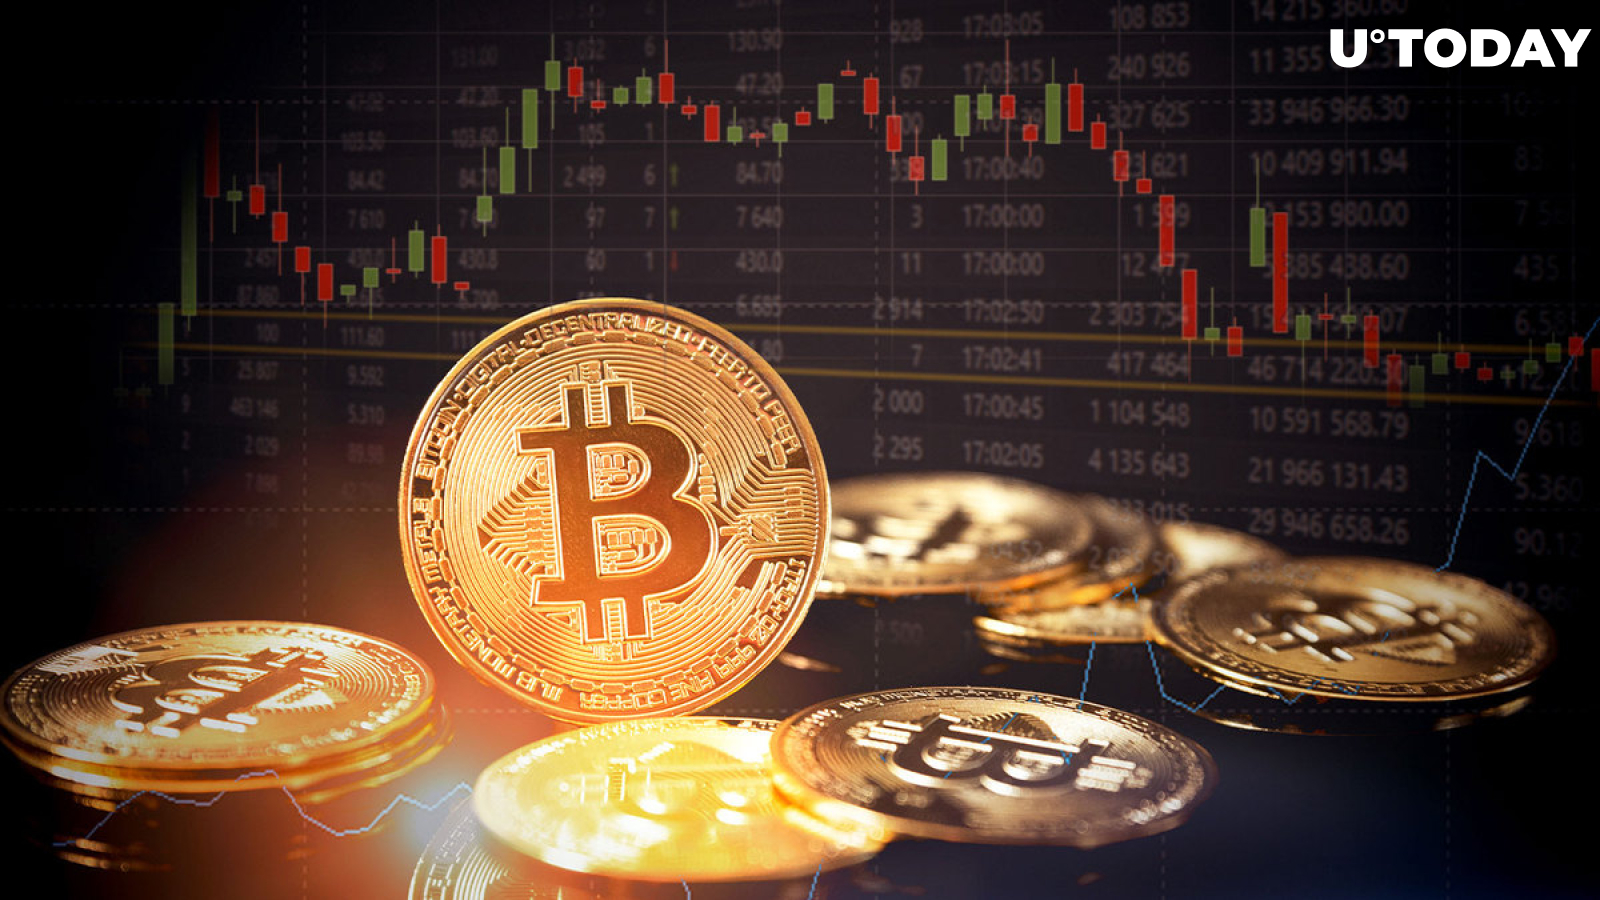 Bitcoin Now Below "Realized Price" as Price Dips Below $21K, What This Implies